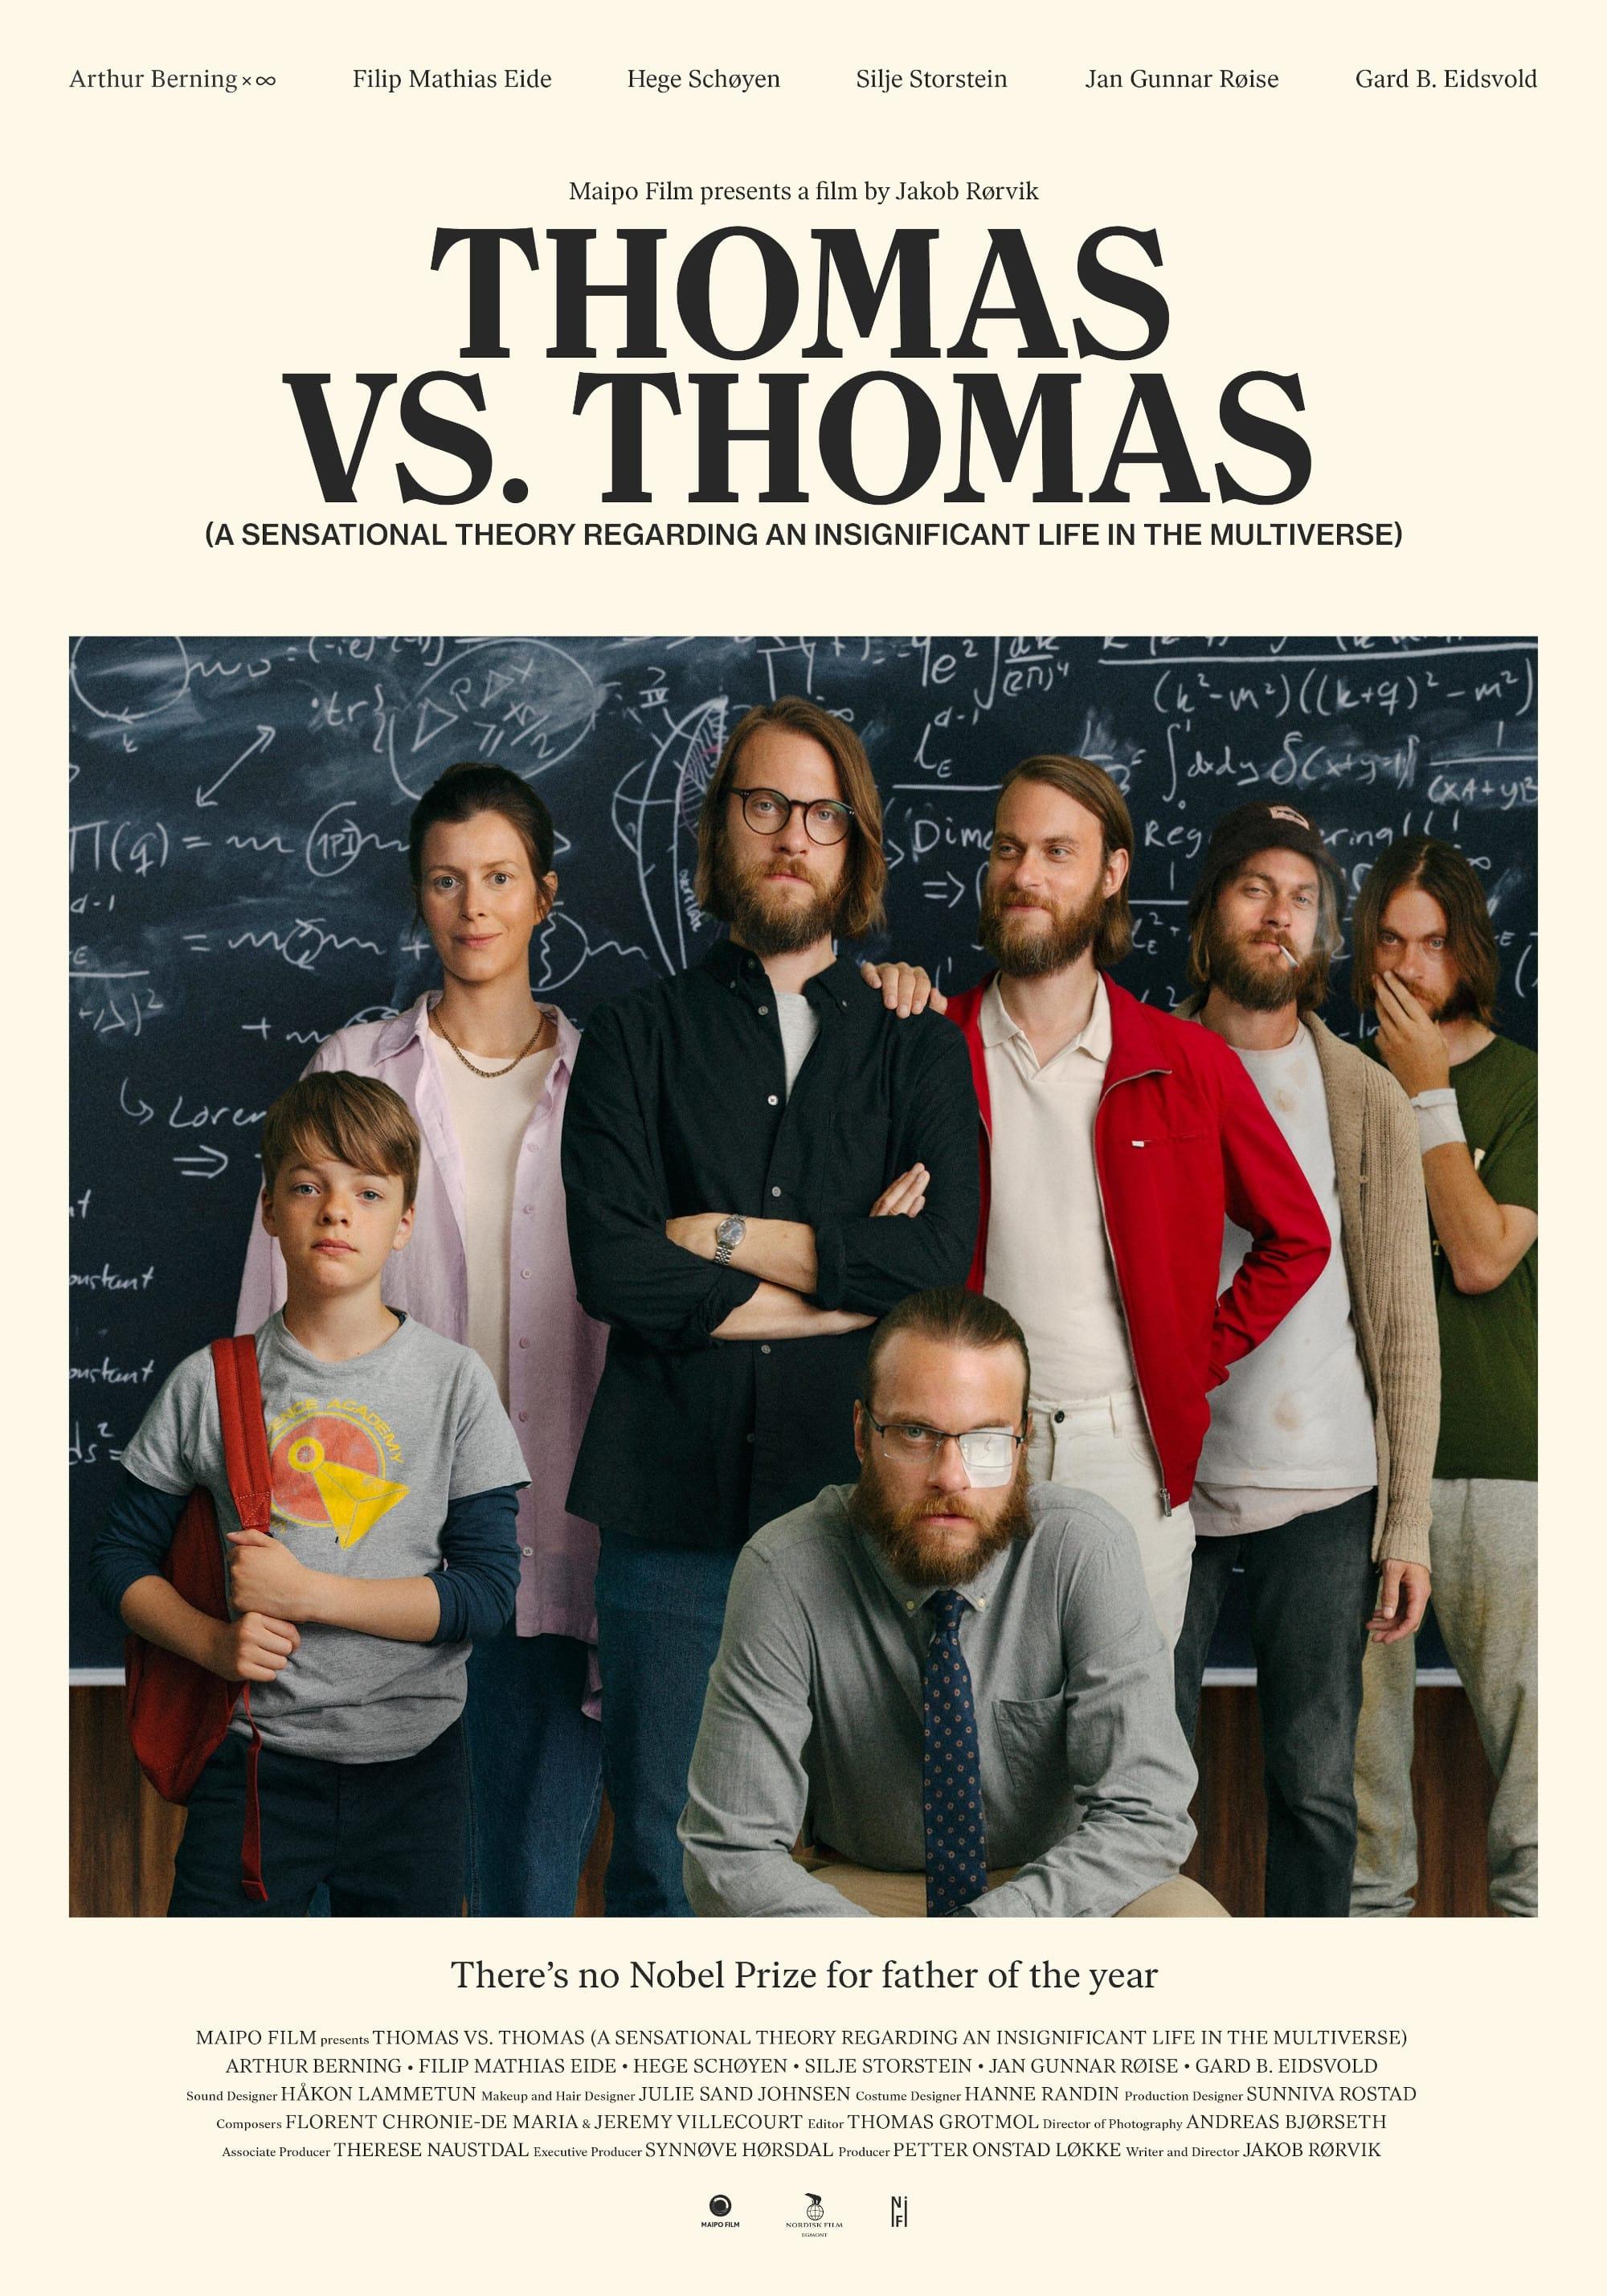 Thomas vs. Thomas (A Sensational Theory Regarding an Insignificant Life in the Multiverse) poster